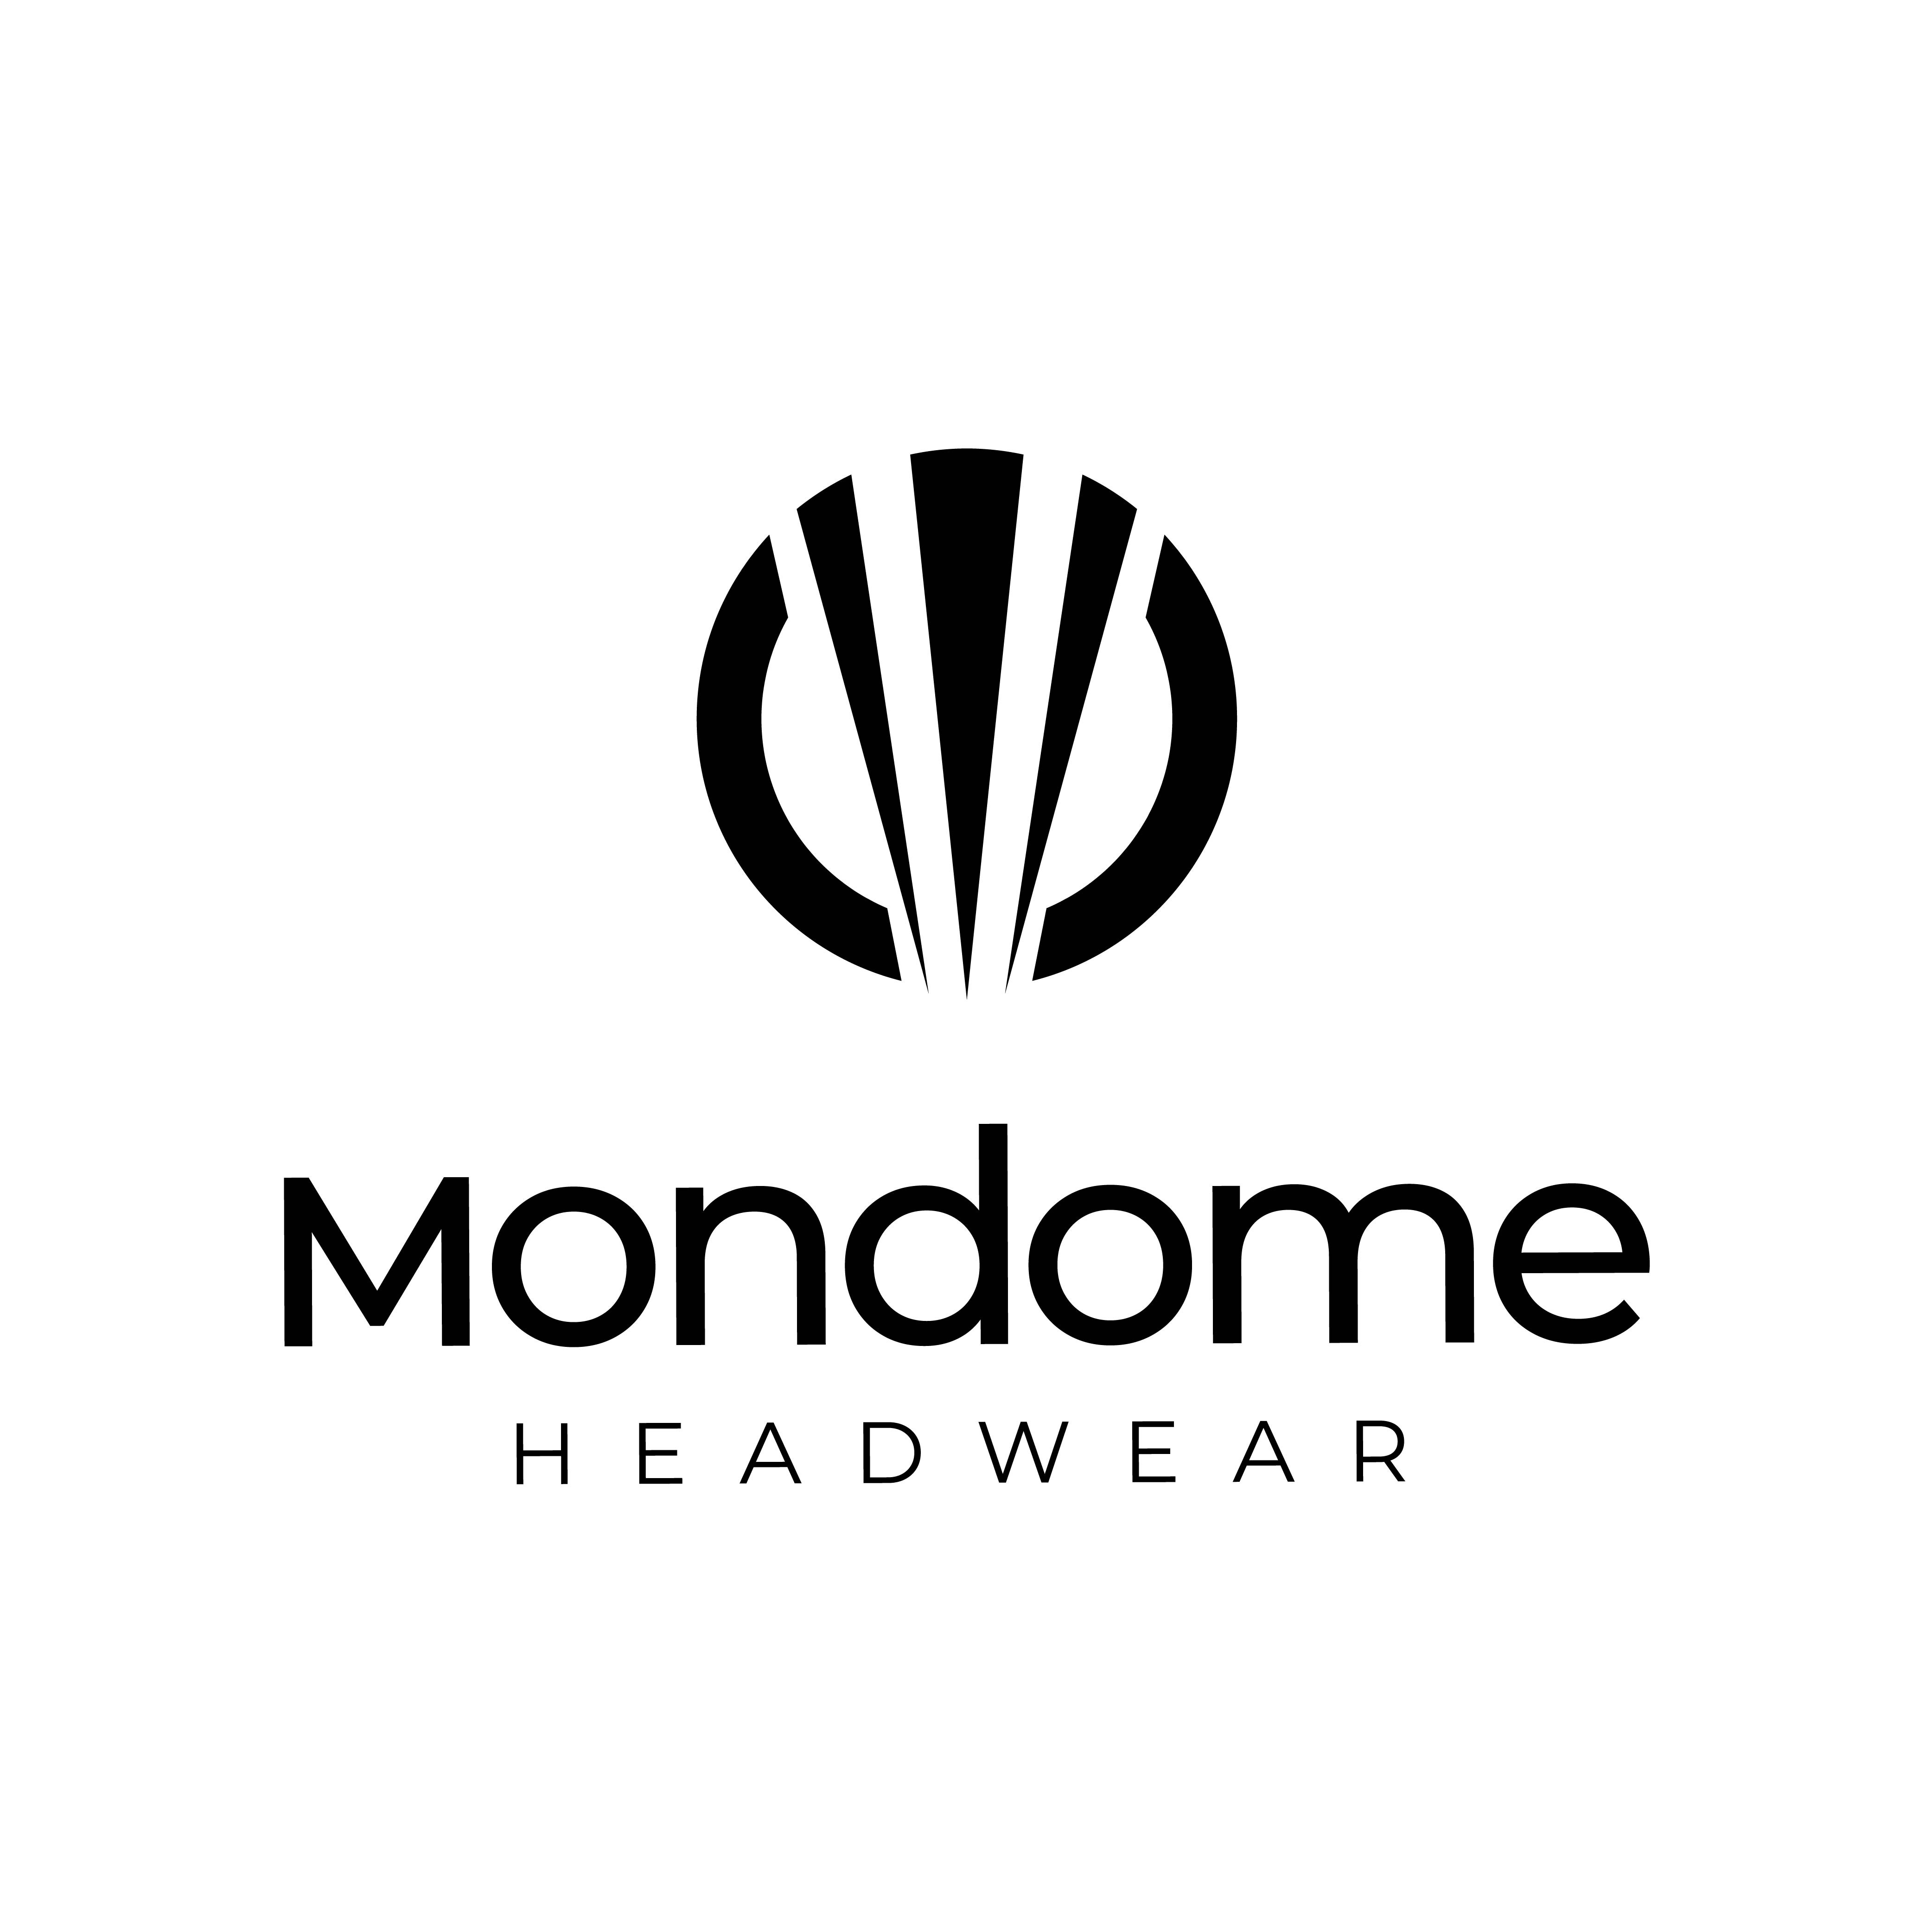 Mondome Headwear: Changing The Game in Fashion for Those with Big Heads, Partners with Athletes and Celebrities